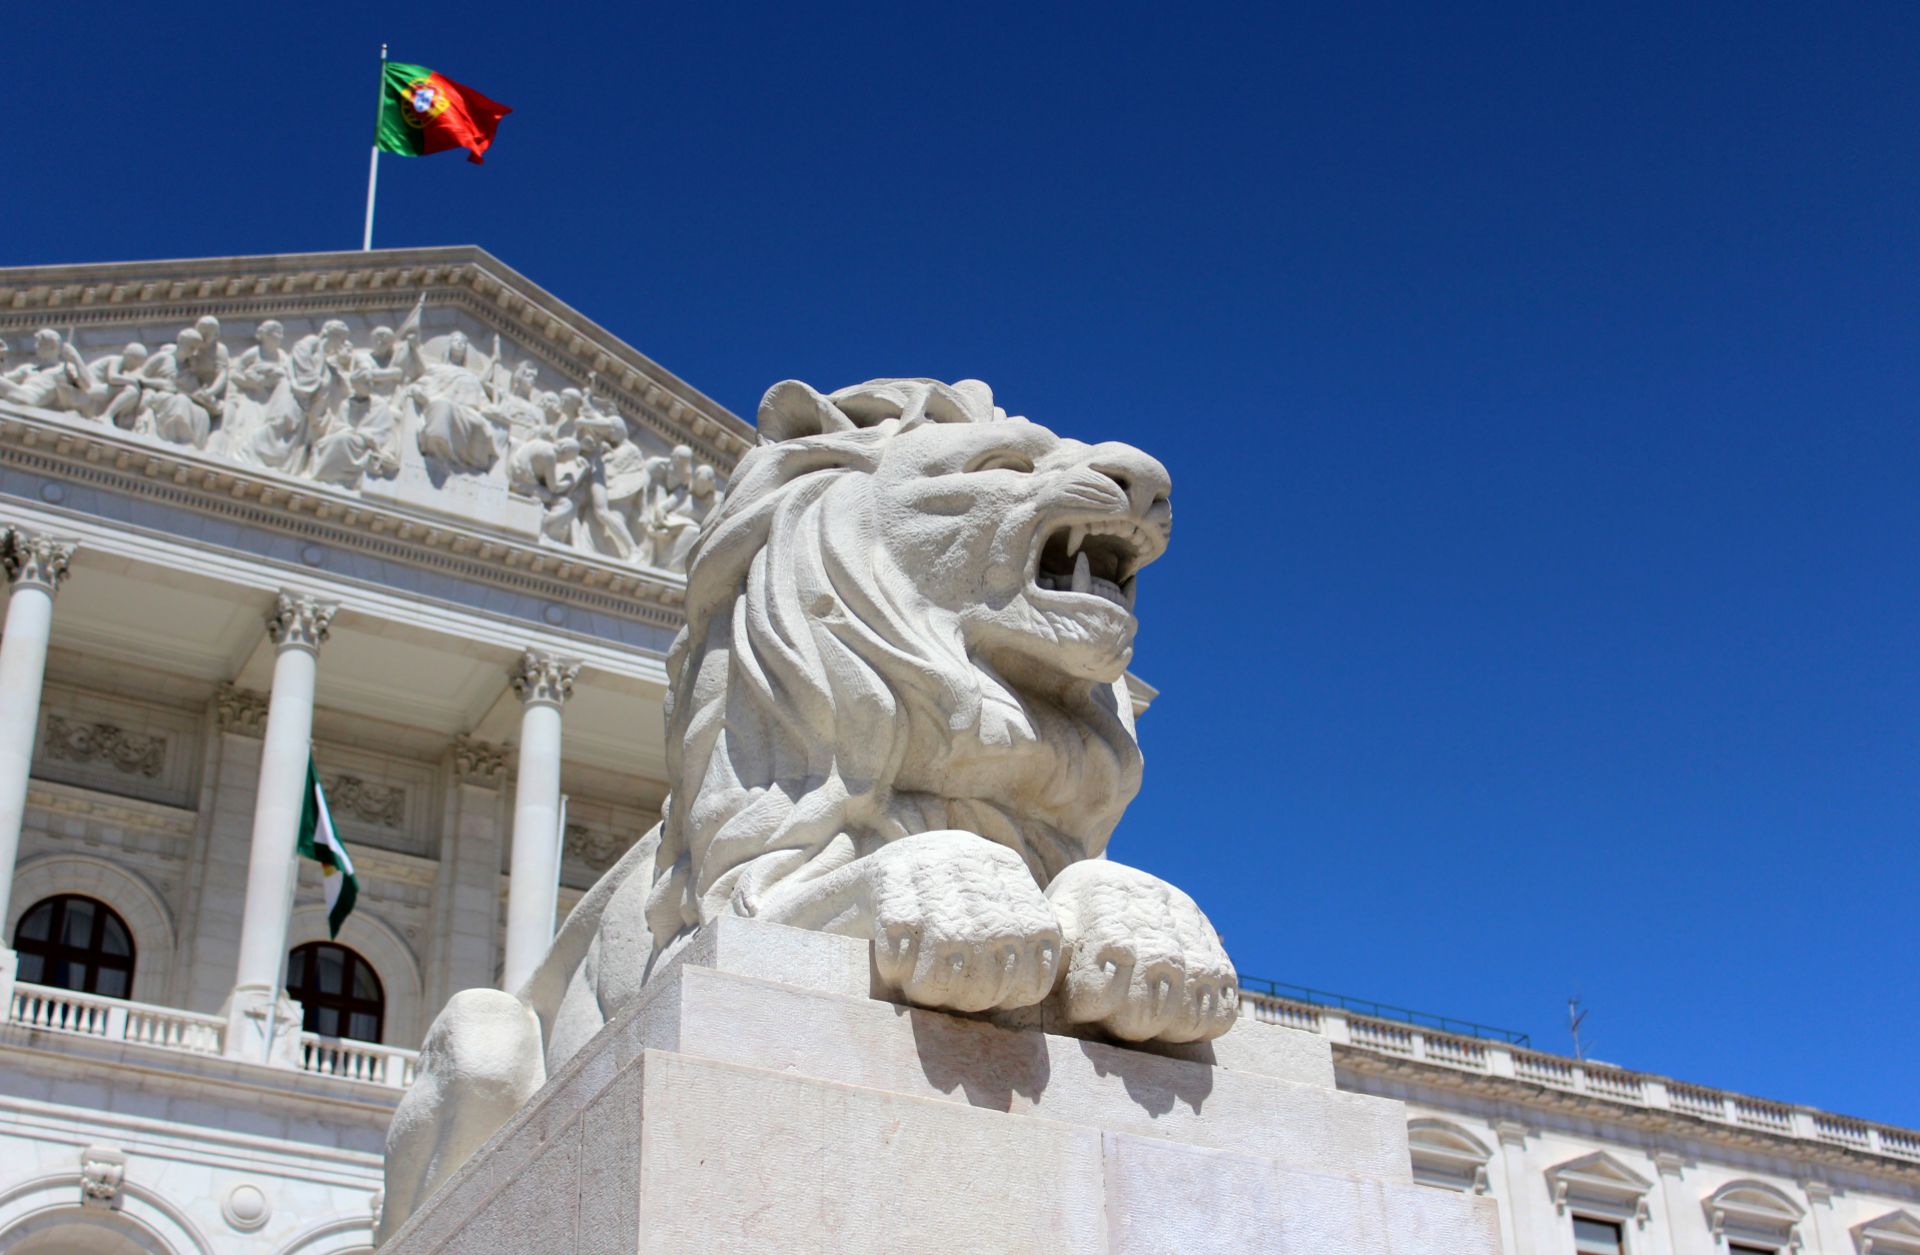 The outside of the Portuguese parliament building is seen in Lisbon, Portugal.